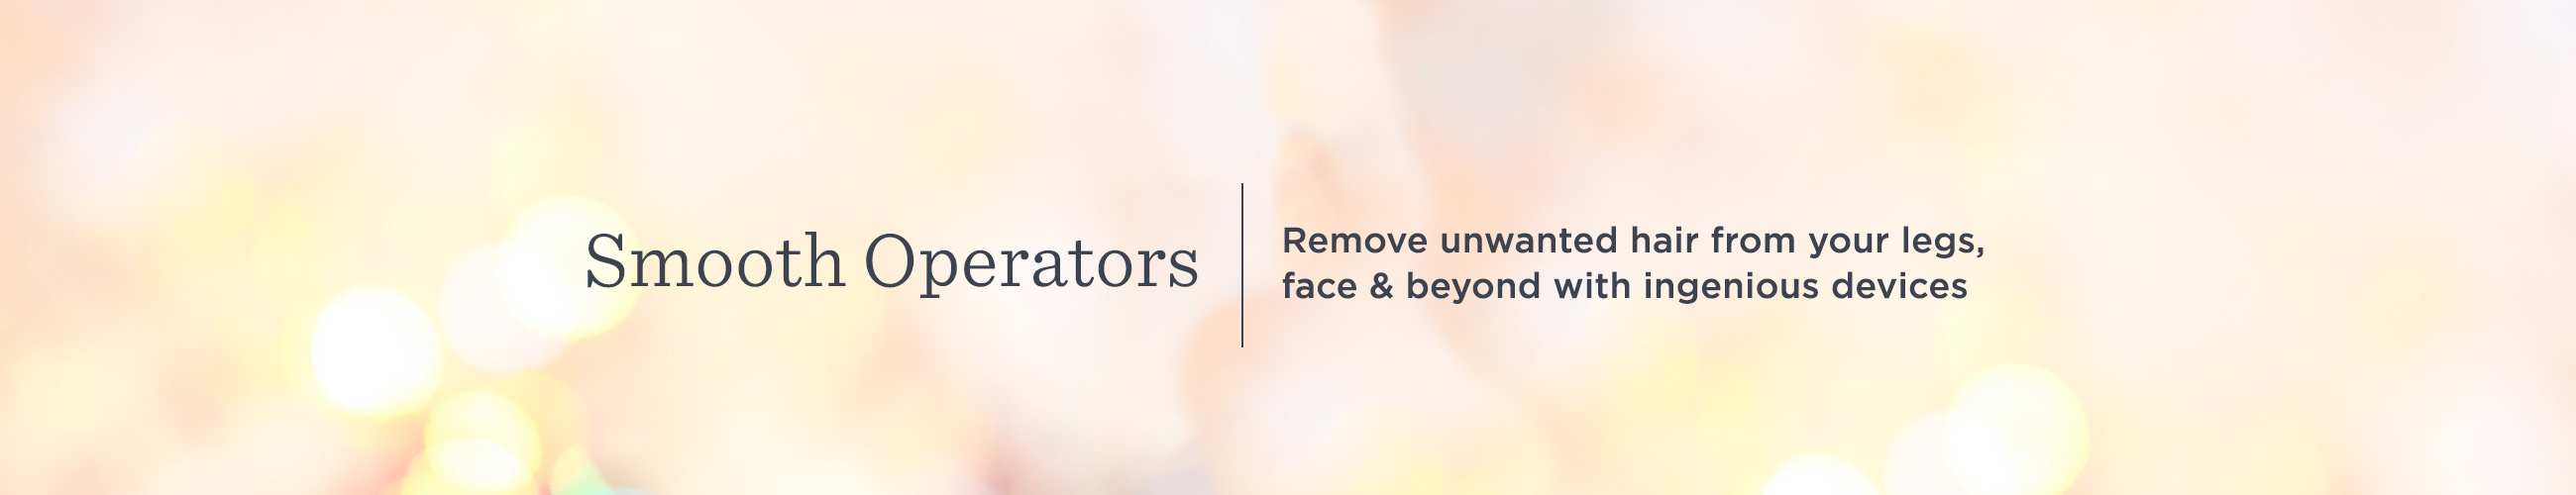 Smooth Operators. Remove unwanted hair from your legs, face & beyond with ingenious devices